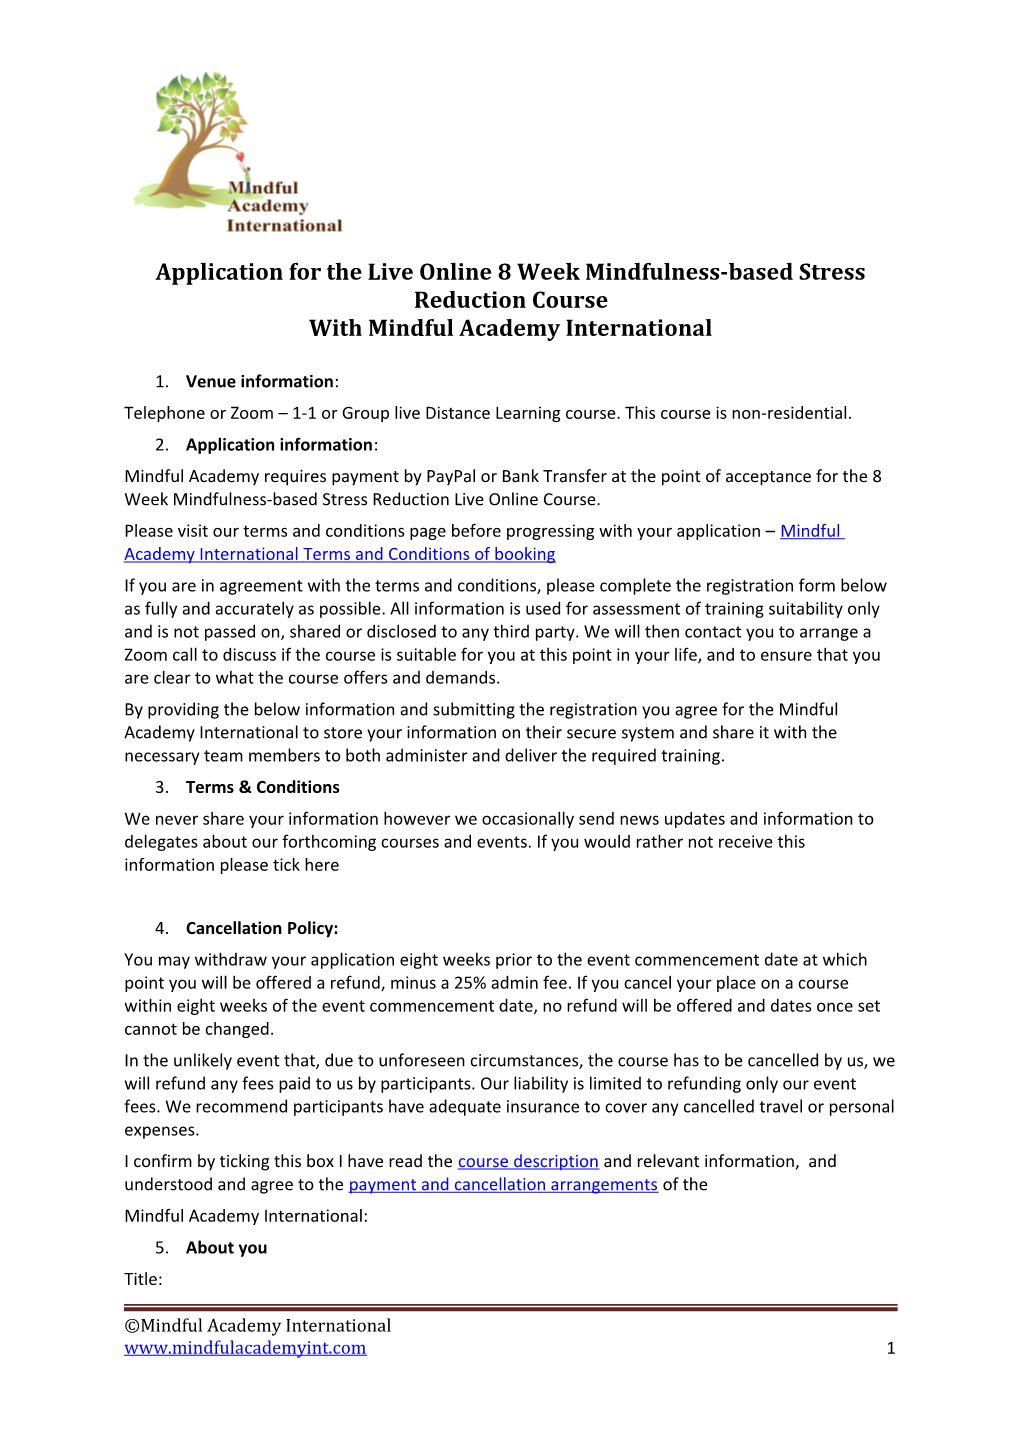 Application for the Live Online 8 Week Mindfulness-Based Stress Reduction Course